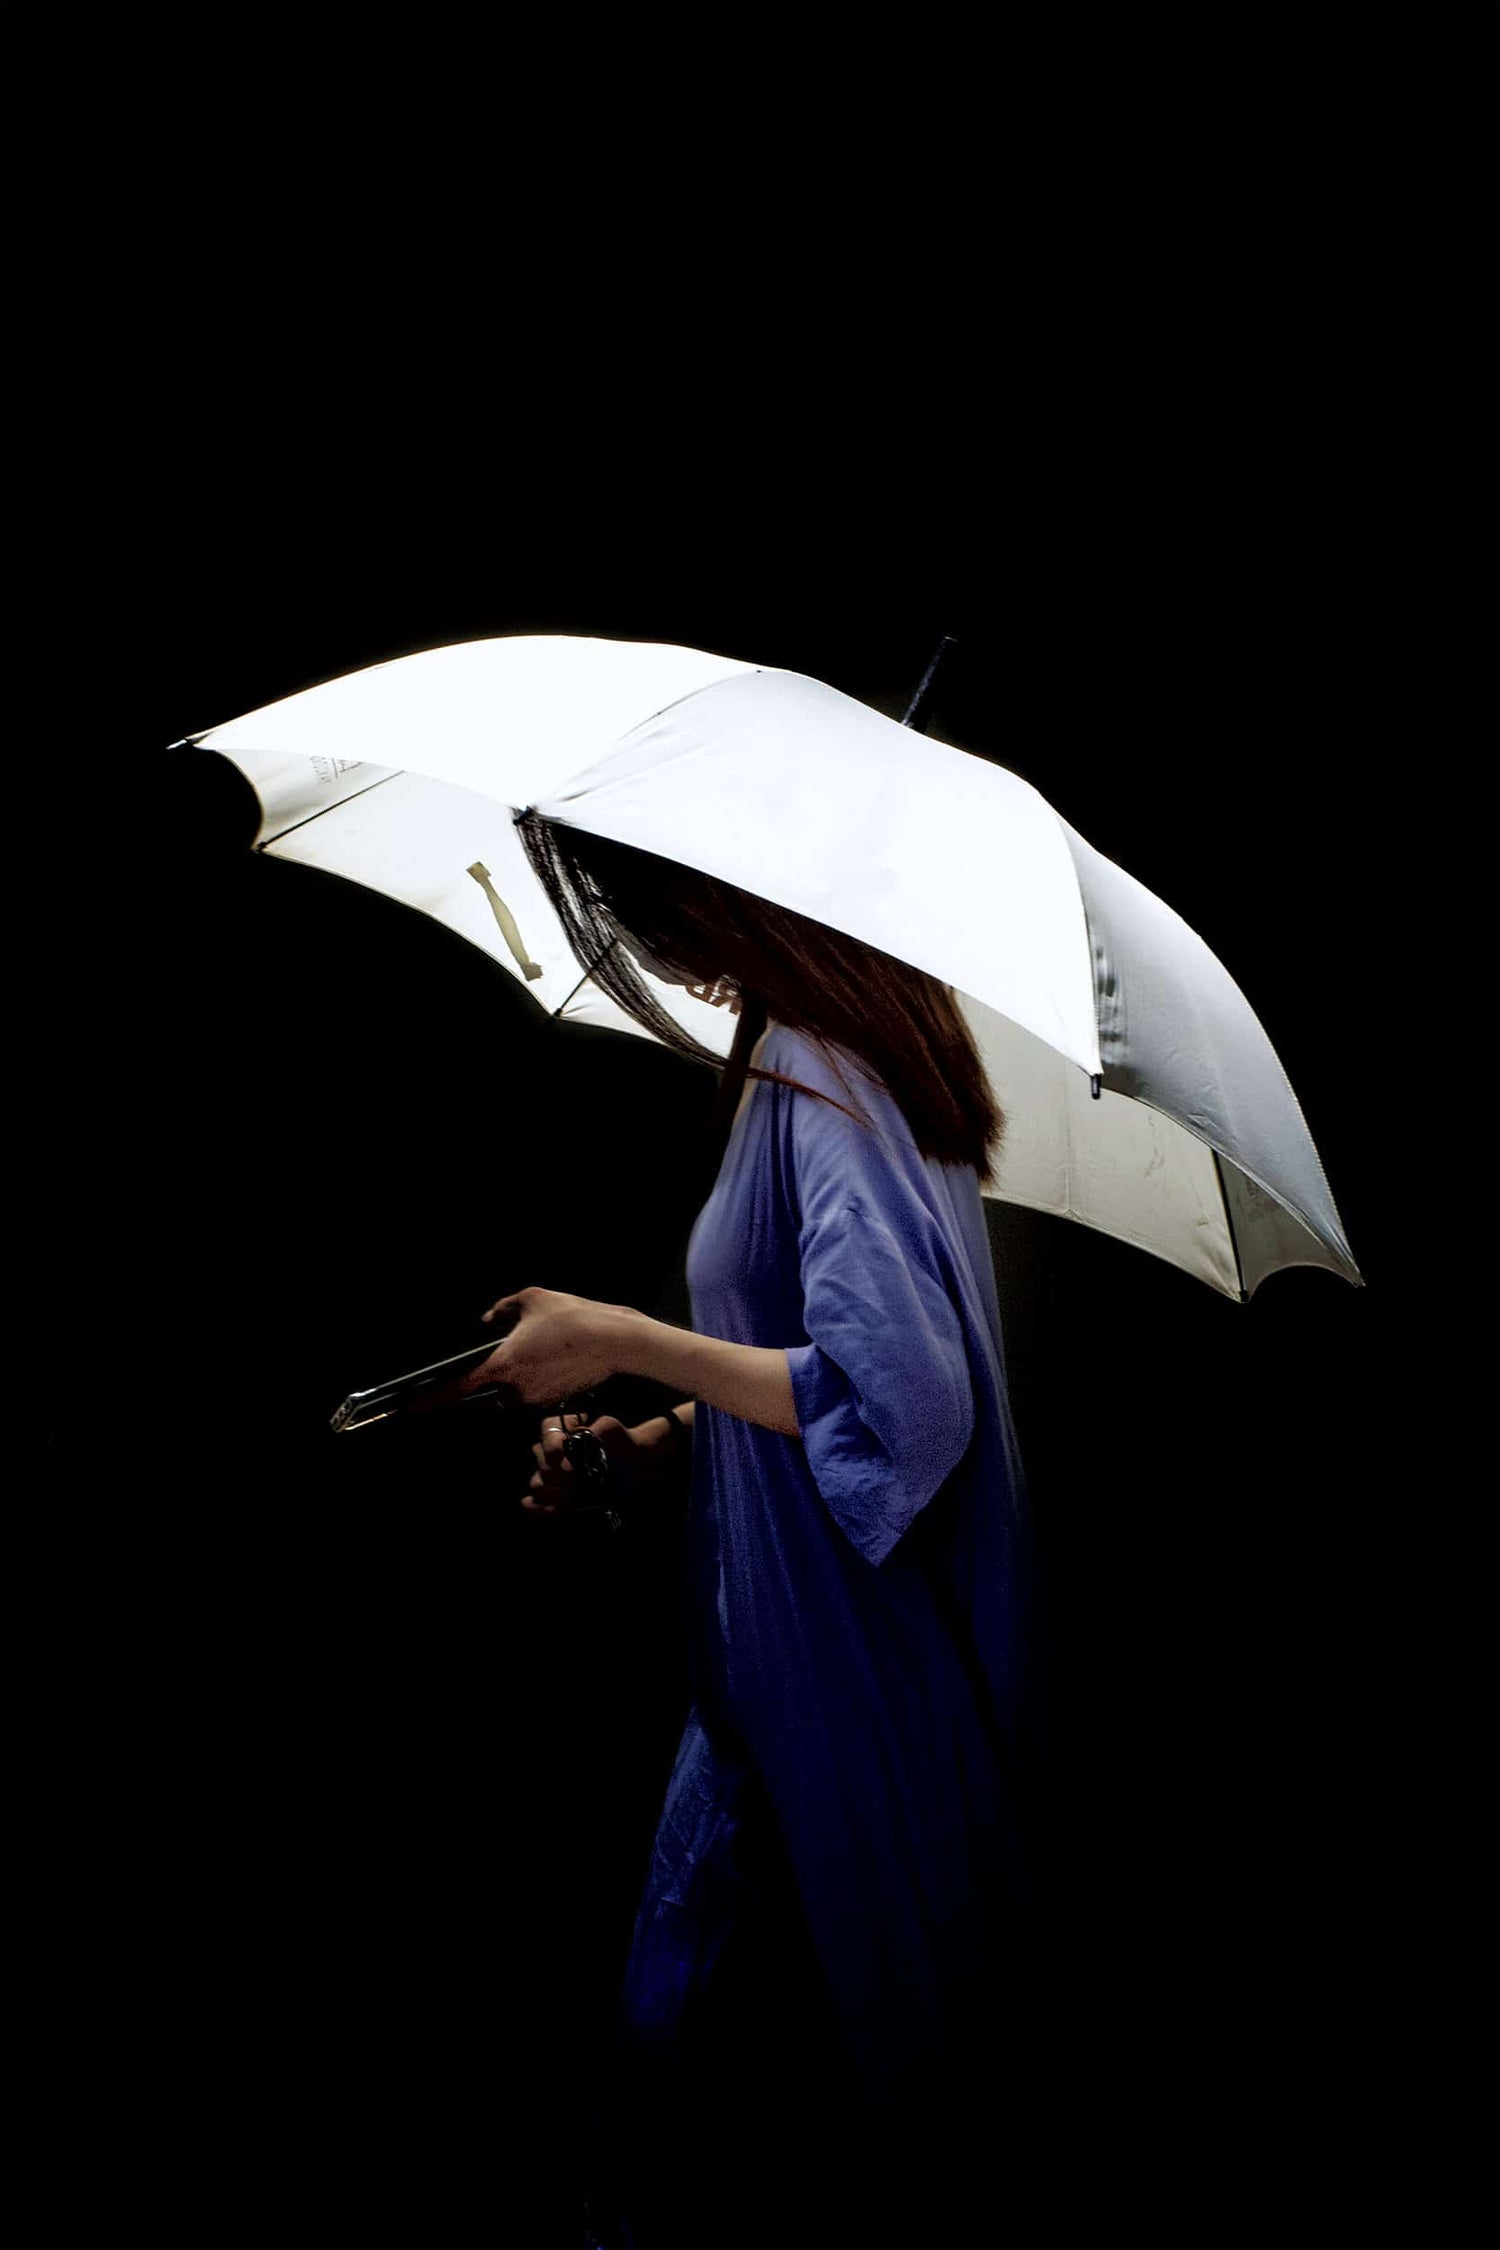 The artpiece 'Protection' by Michael Cai shows a woman in blue dress walking with a white umbrella against a completely black background.